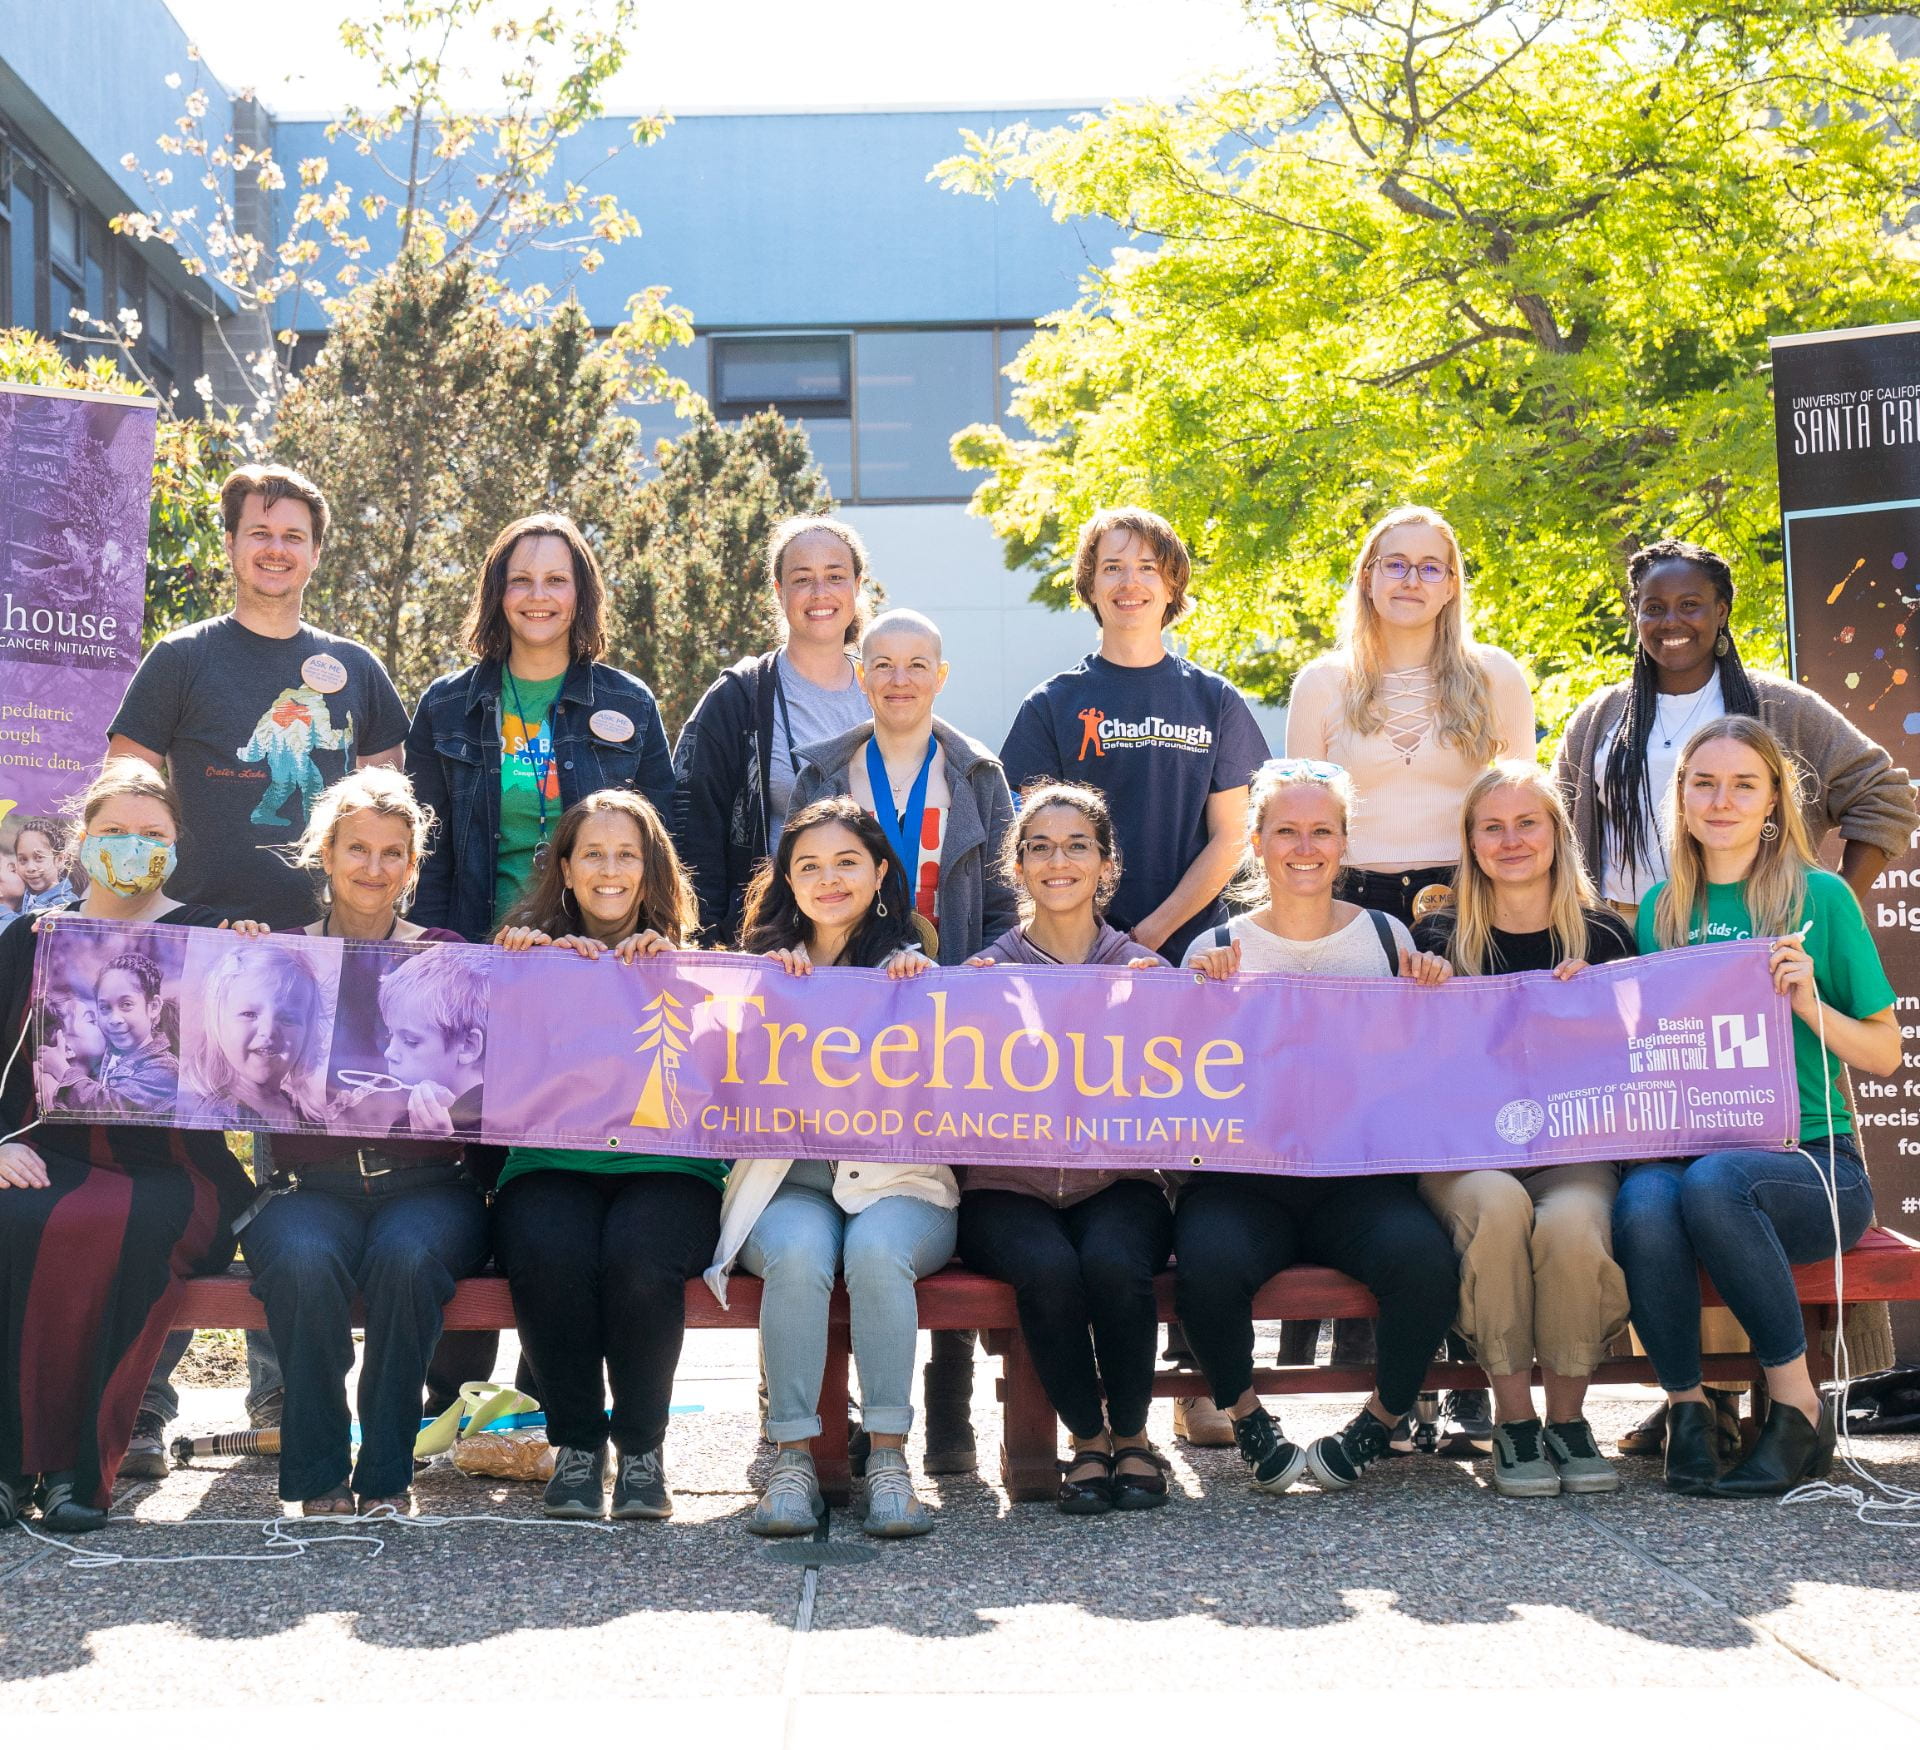 A group photo of a team holding a "Treehouse Childhood Cancer Initiative" Banner